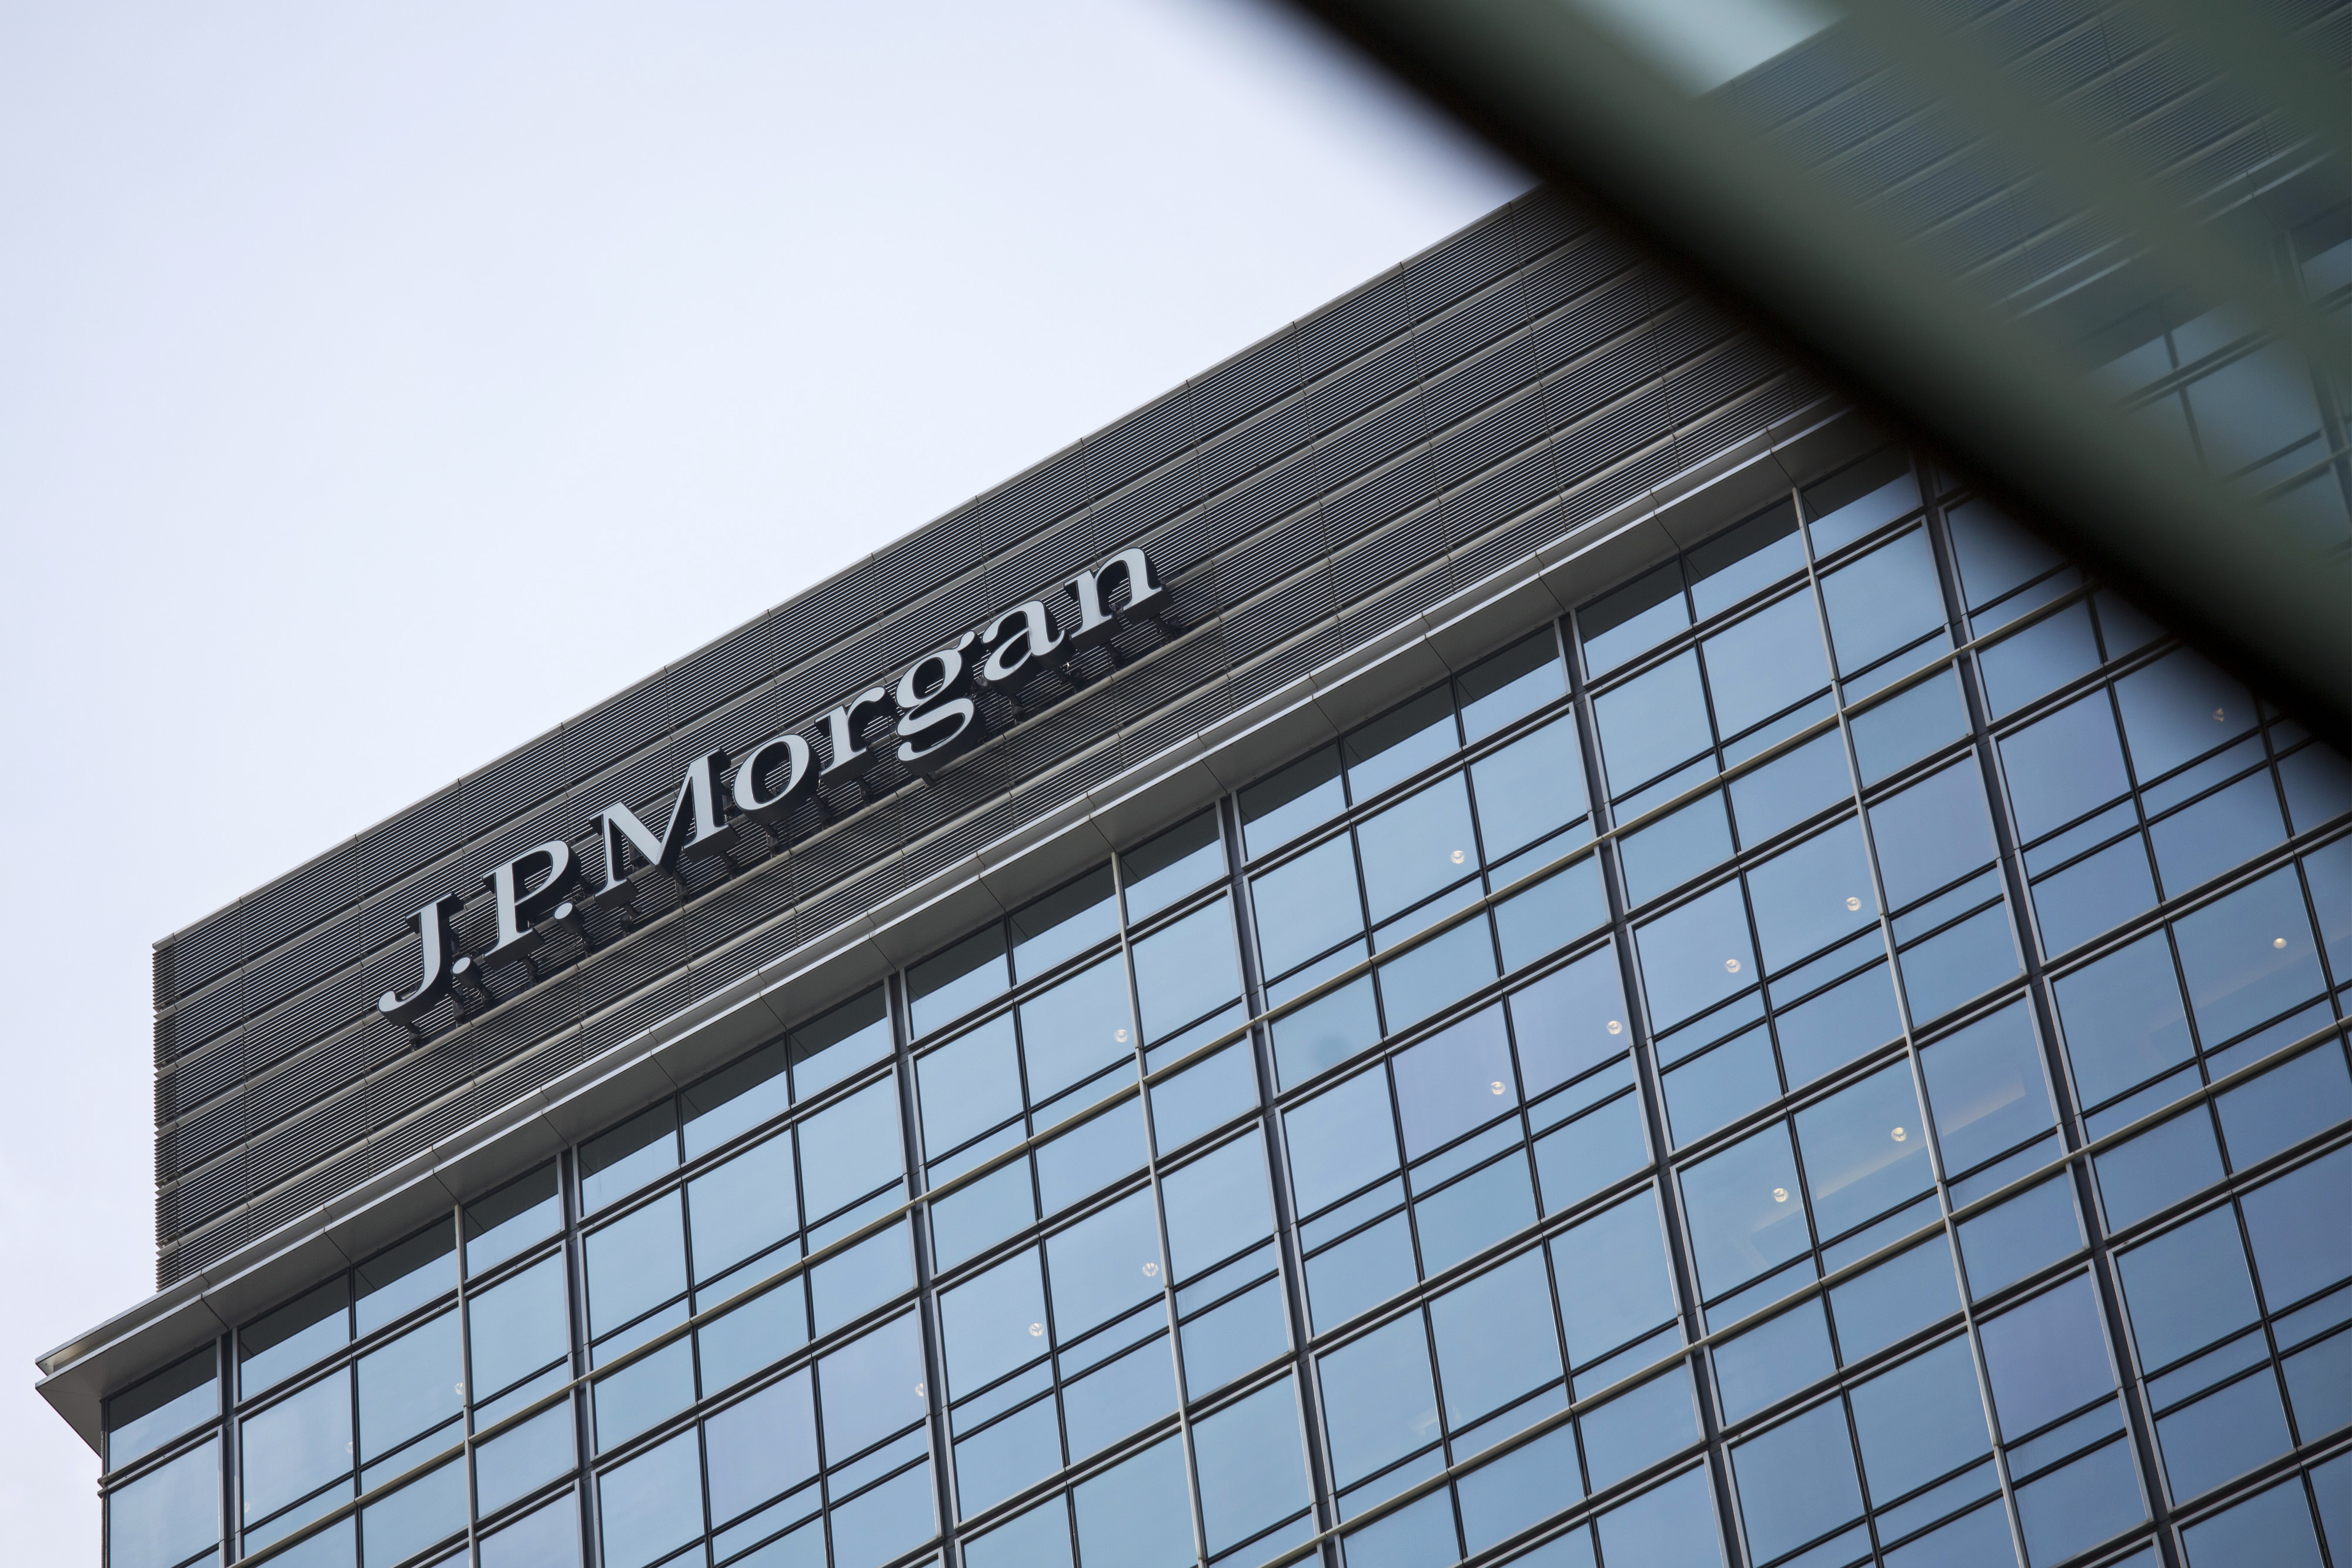 Signage for JP Morgan Chase is displayed atop Chater House in the central business district of Hong Kong on Aug. 29, 2013 (Bloomberg/Getty Images)